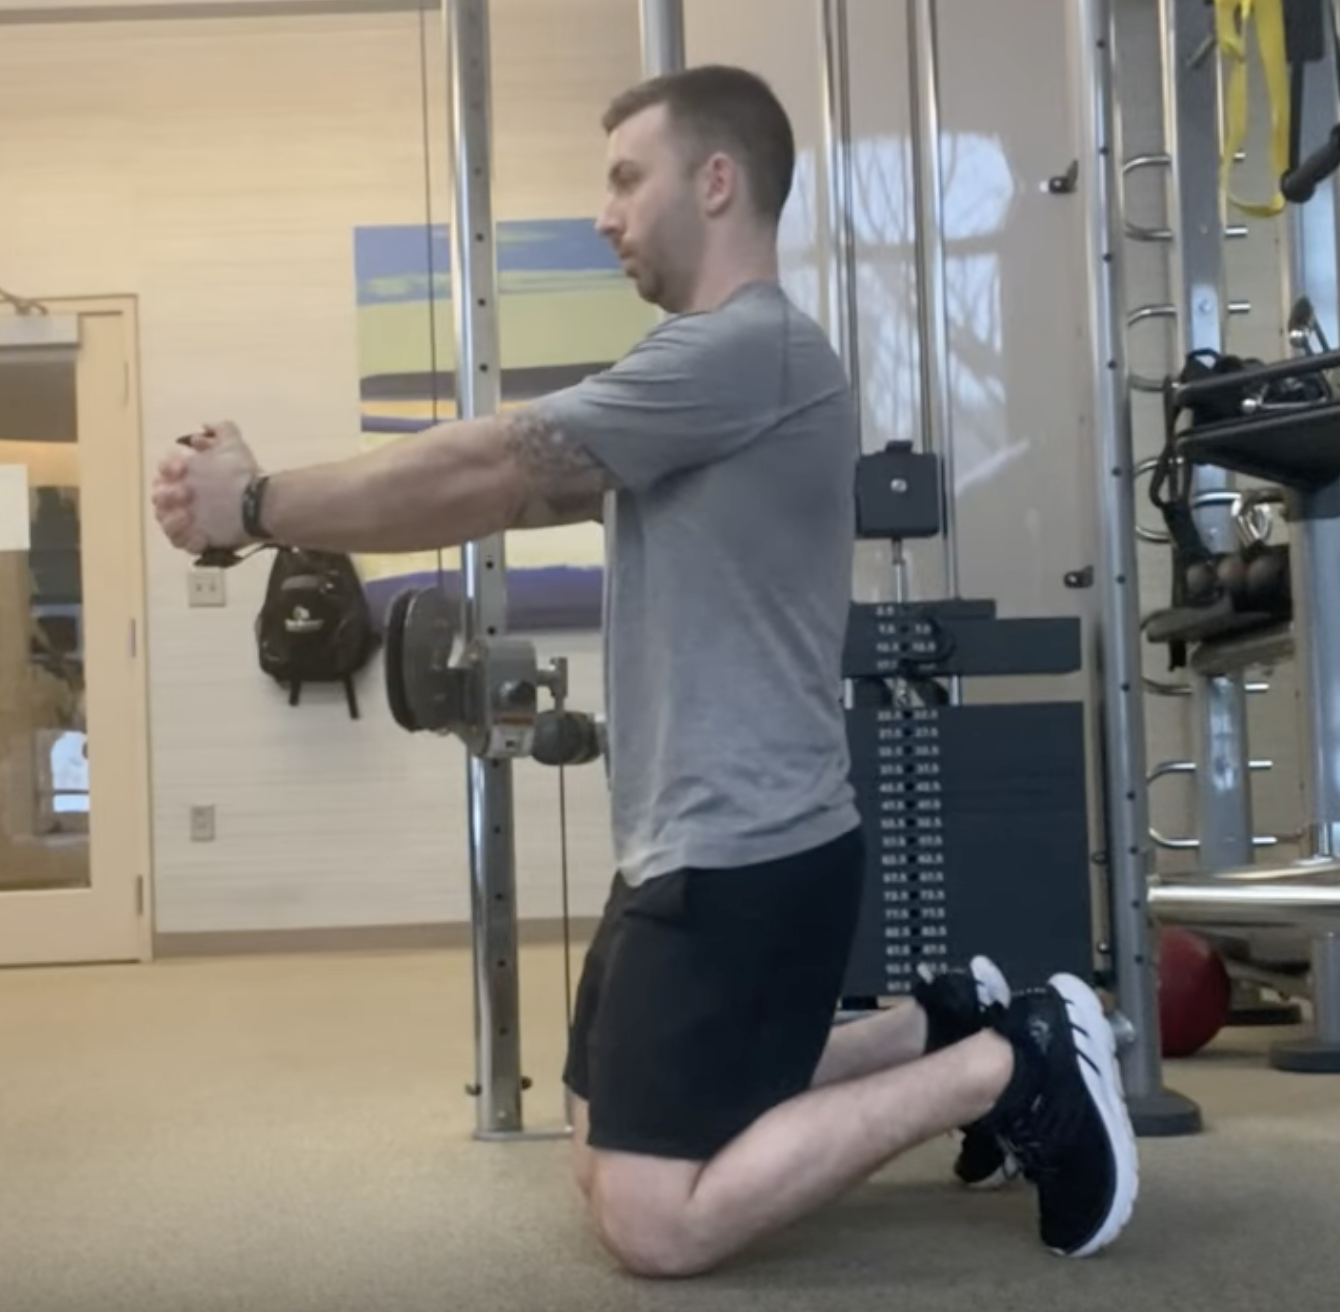 Lateral Core Training: Tall Kneeling Anti-Rotation Press to Overhead